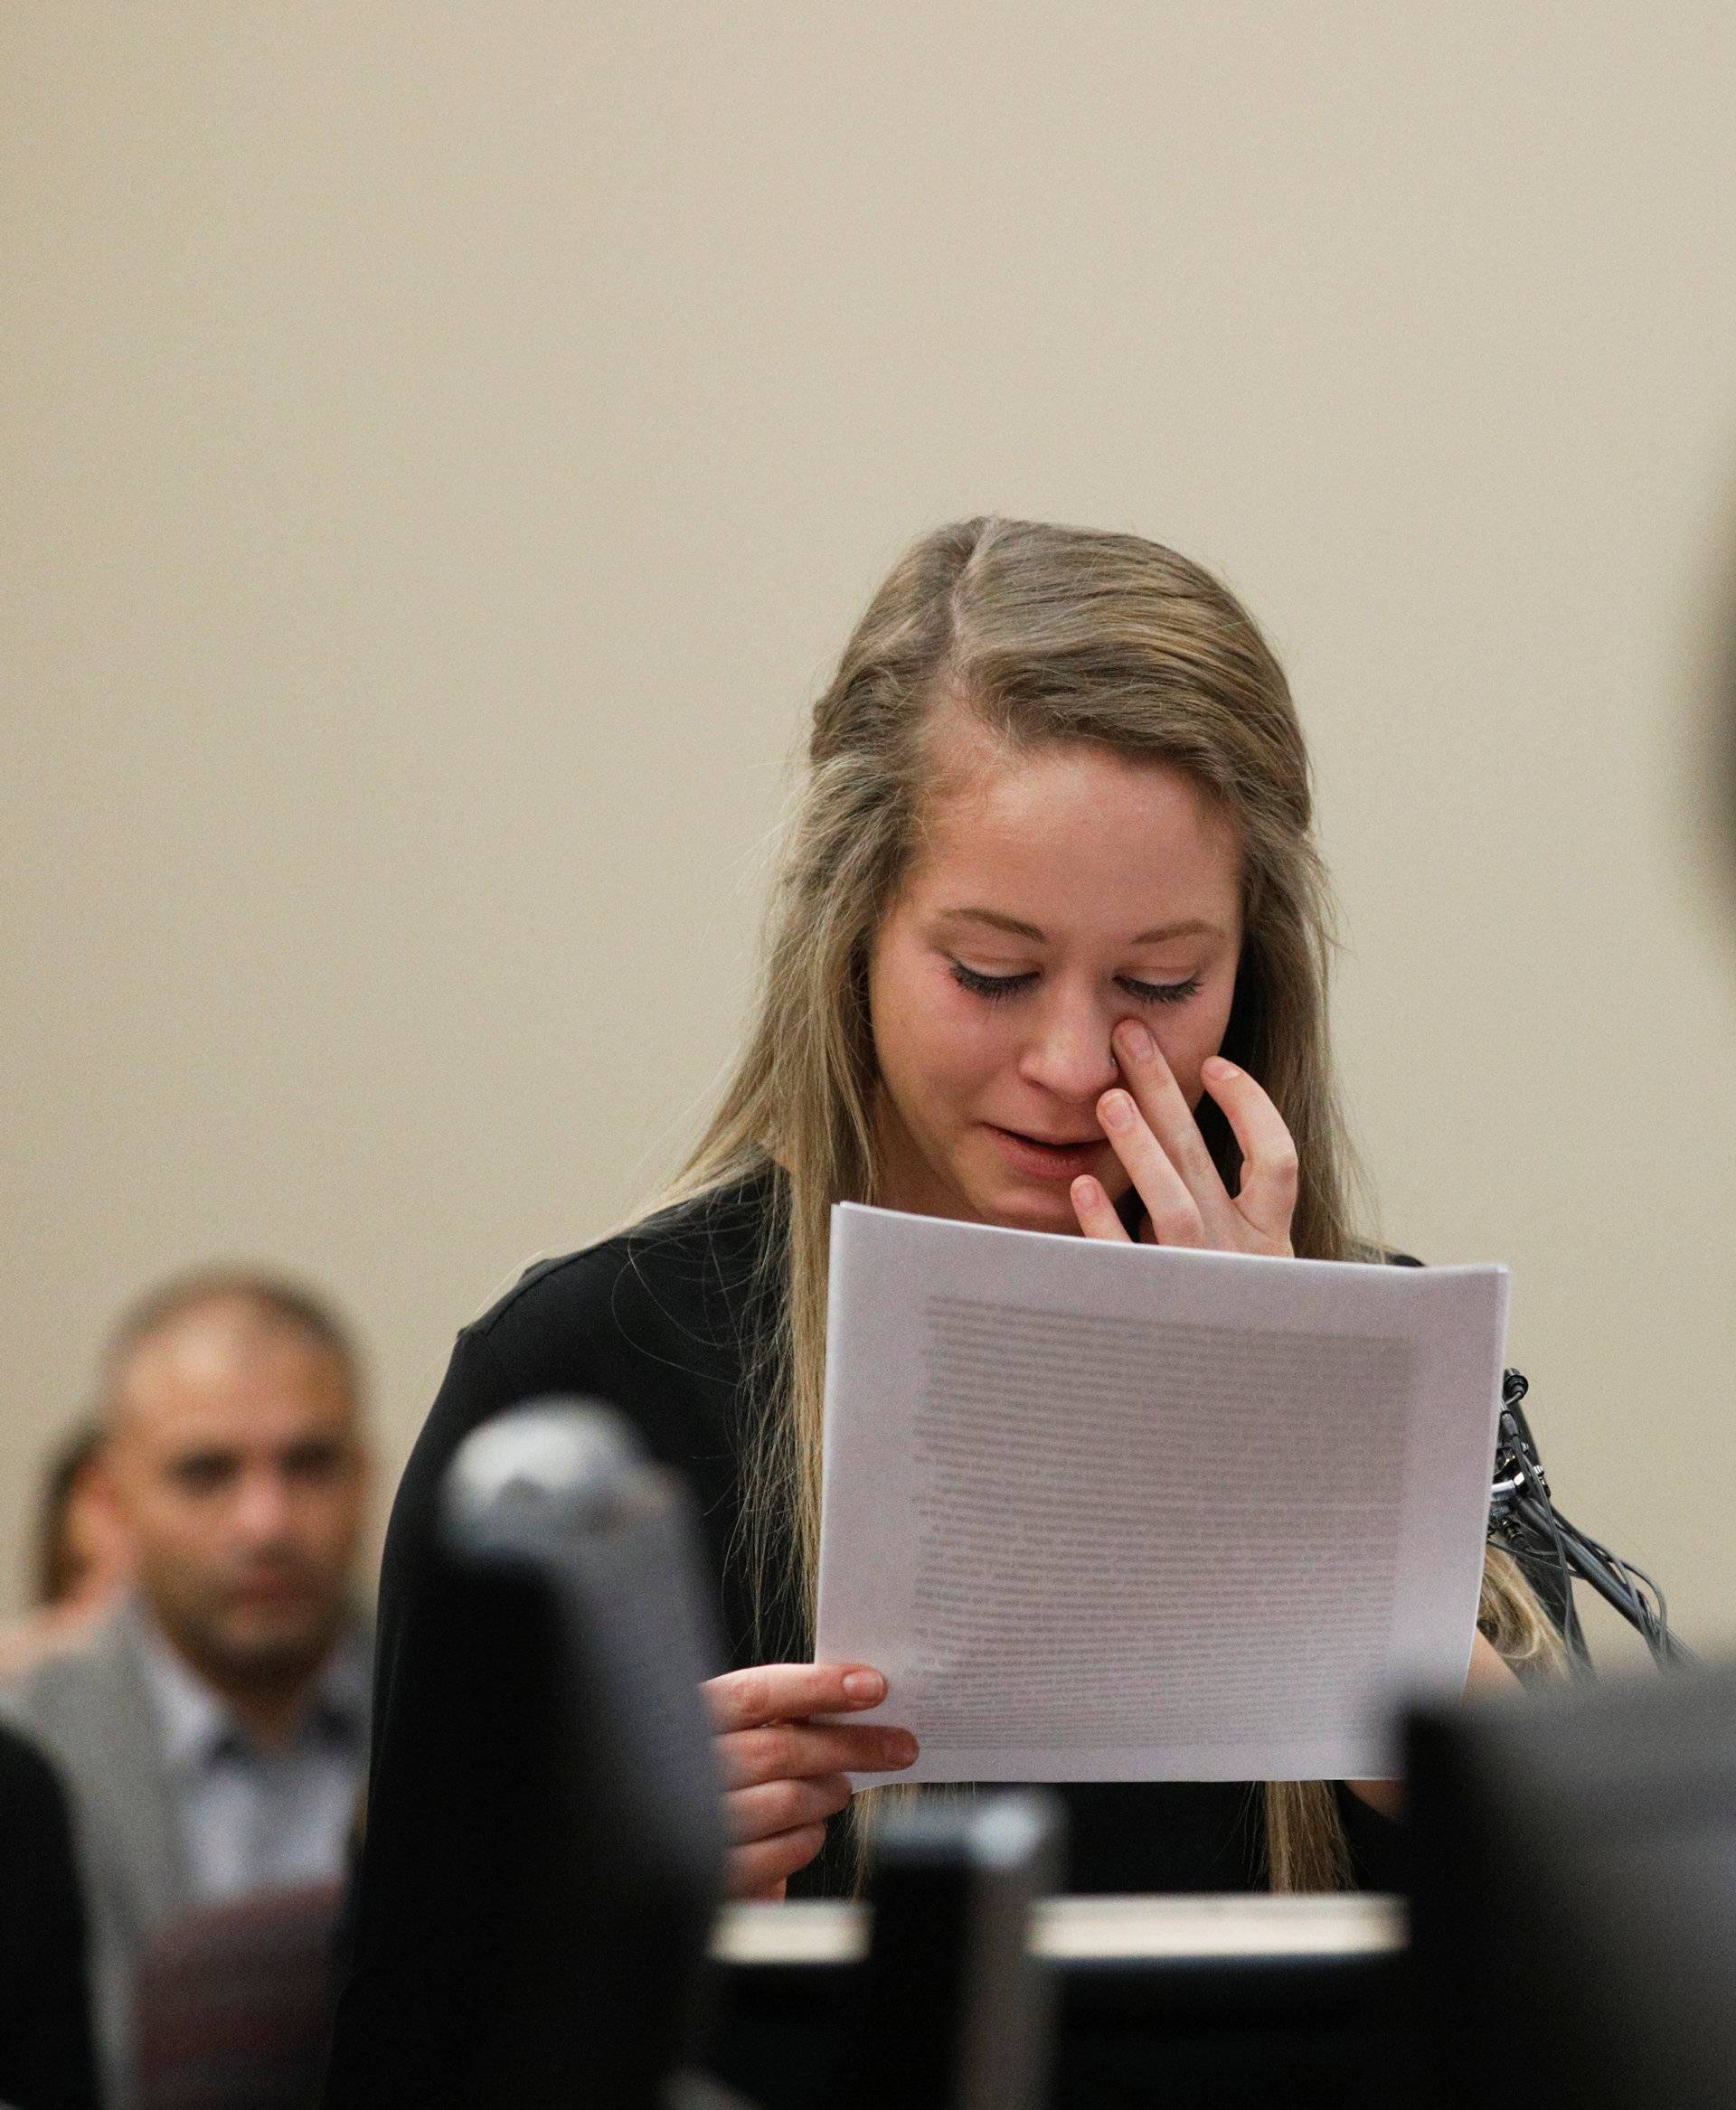 Victim Emily Morales speaks at the sentencing hearing for Larry Nassar, a former team USA Gymnastics doctor who pleaded guilty in November 2017 to sexual assault charges, in Lansing, Michigan